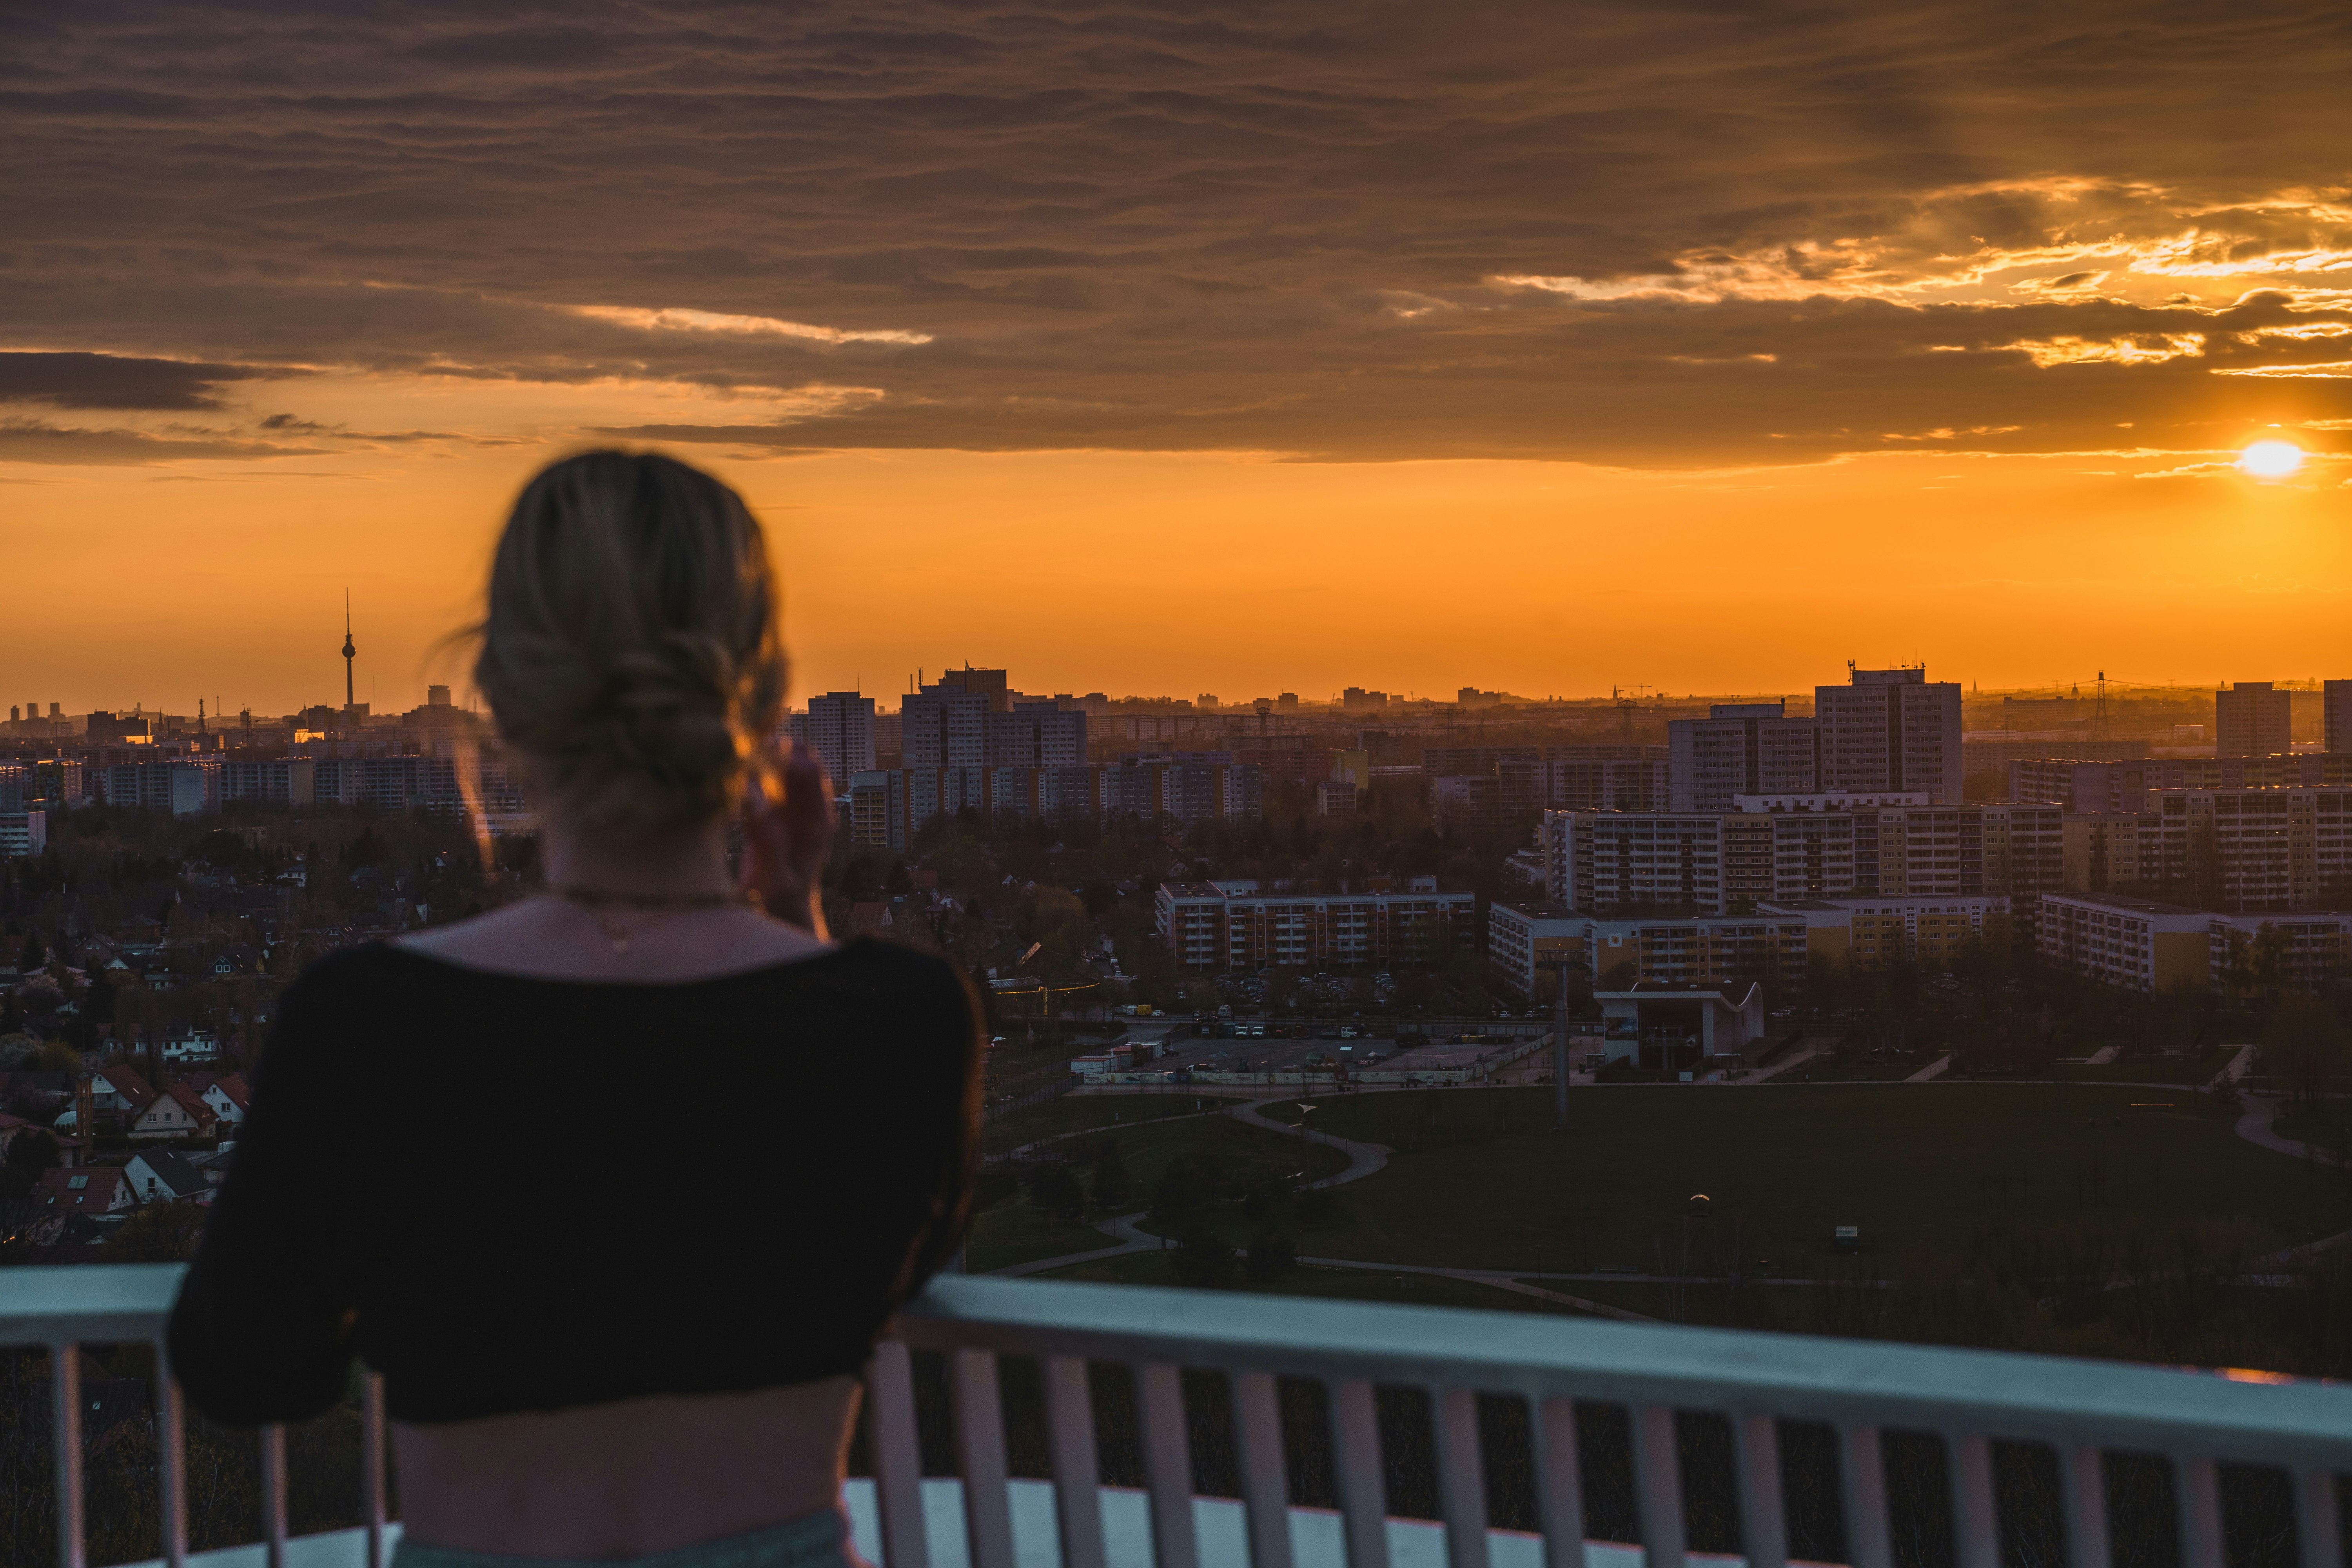 woman in black shirt standing on balcony during sunset